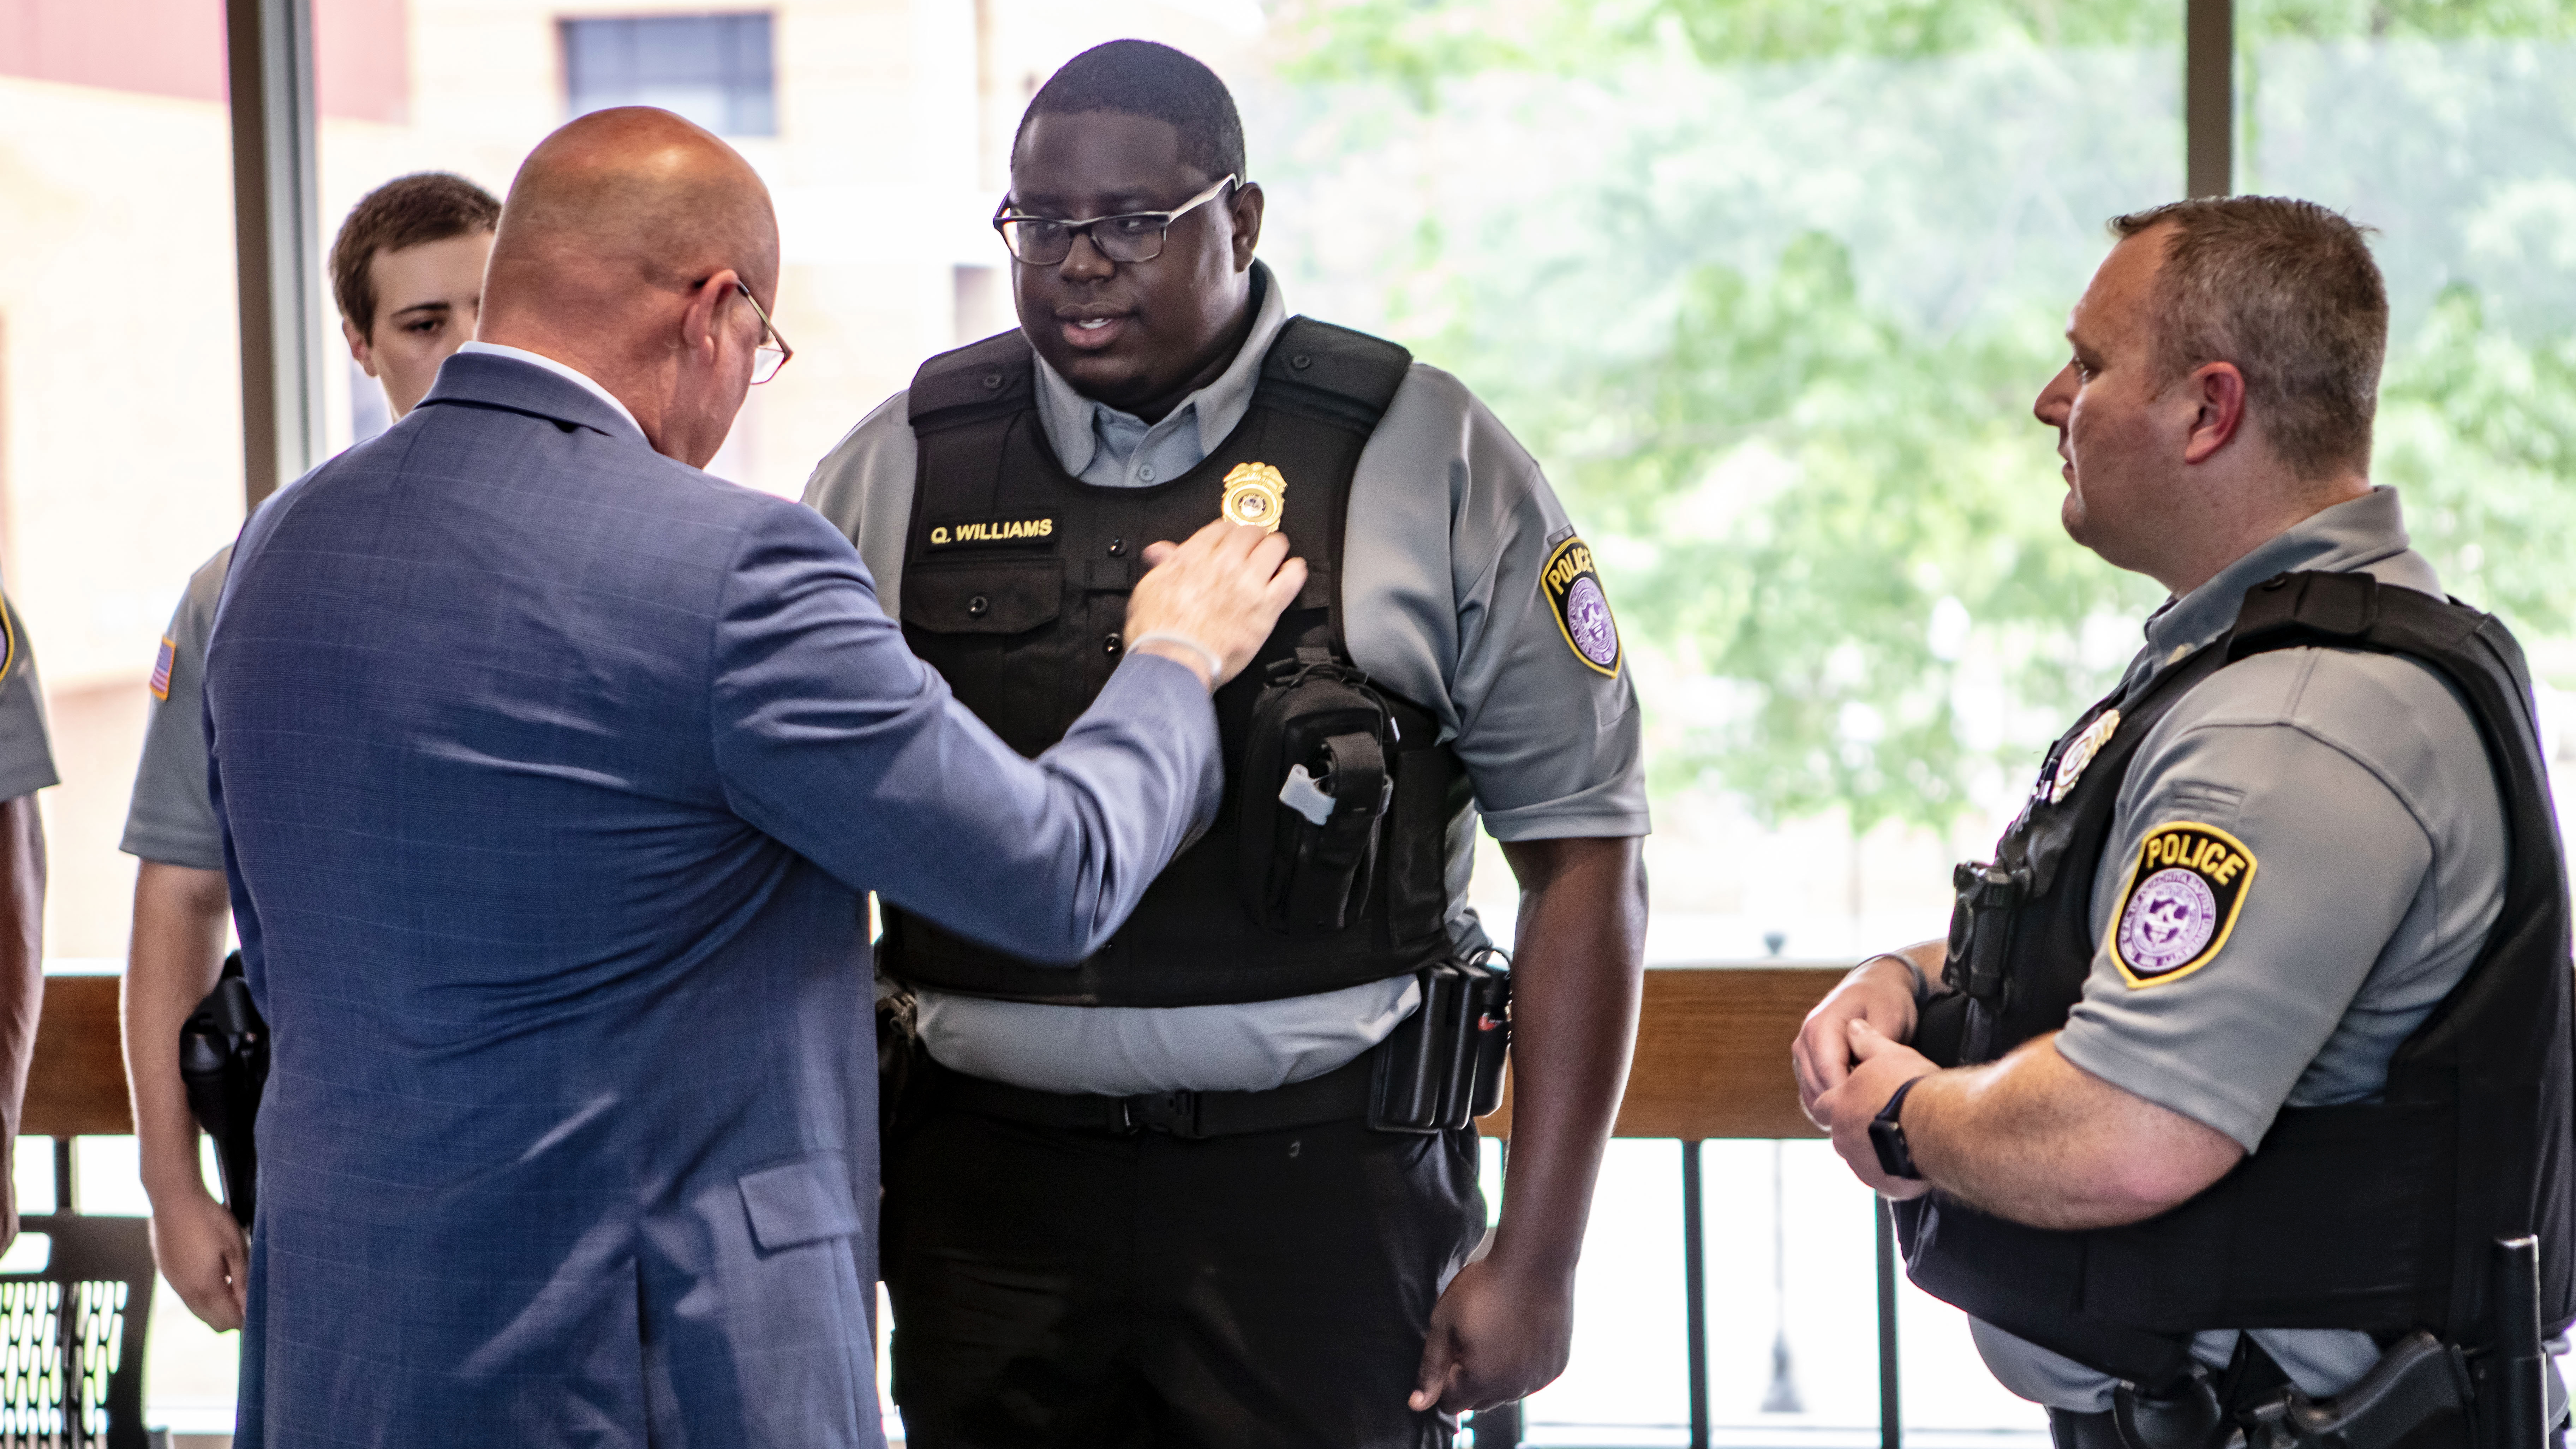 Quantel Williams is commissioned a member of Ouachita campus police